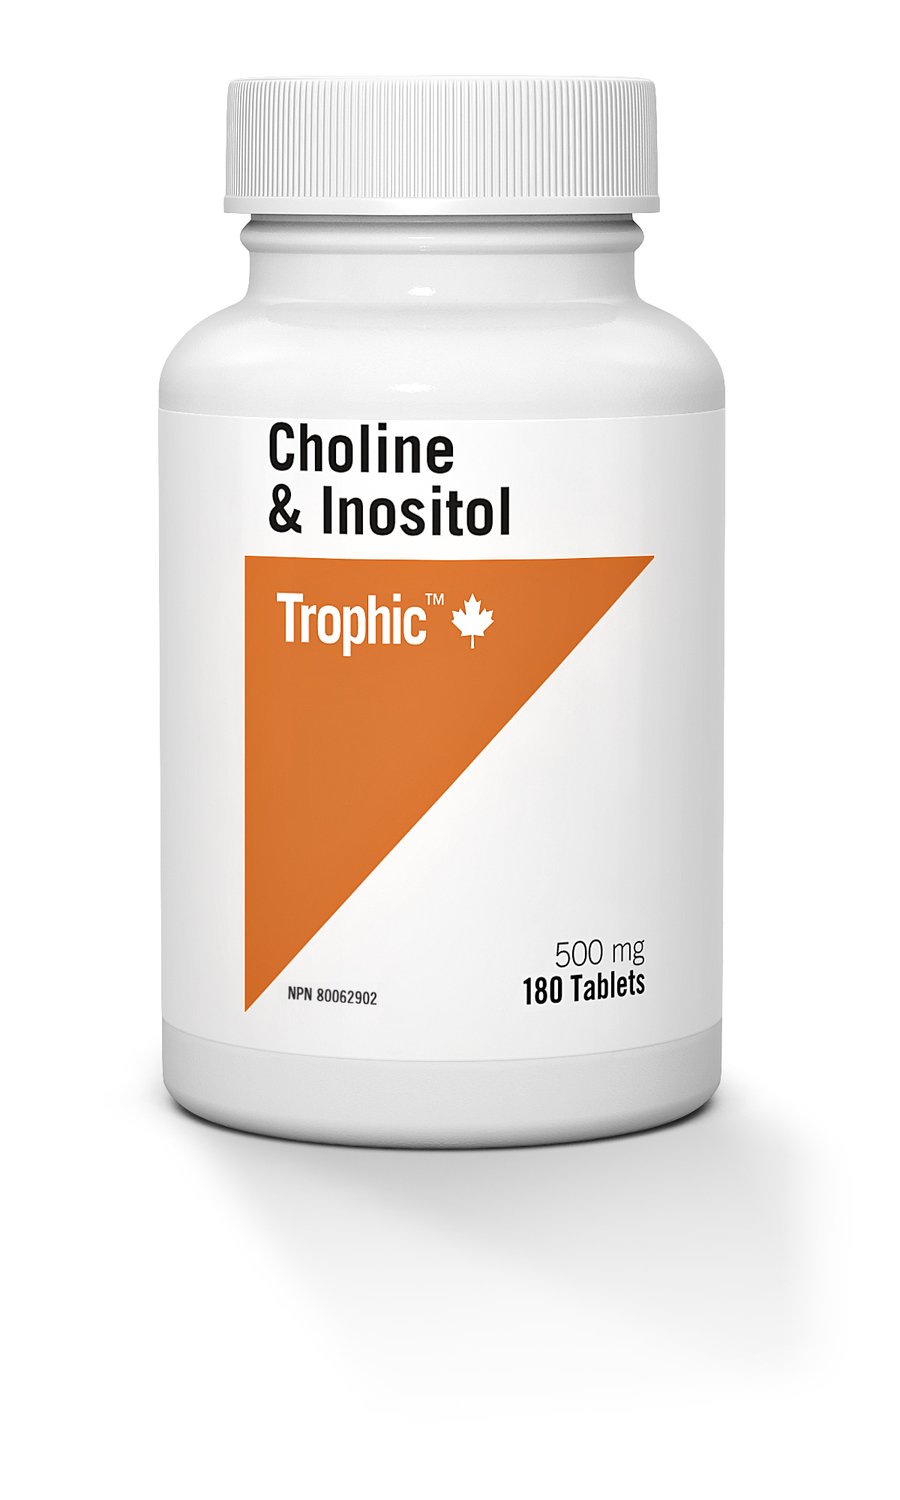 Trophic Choline & Inositol 180 Tablets